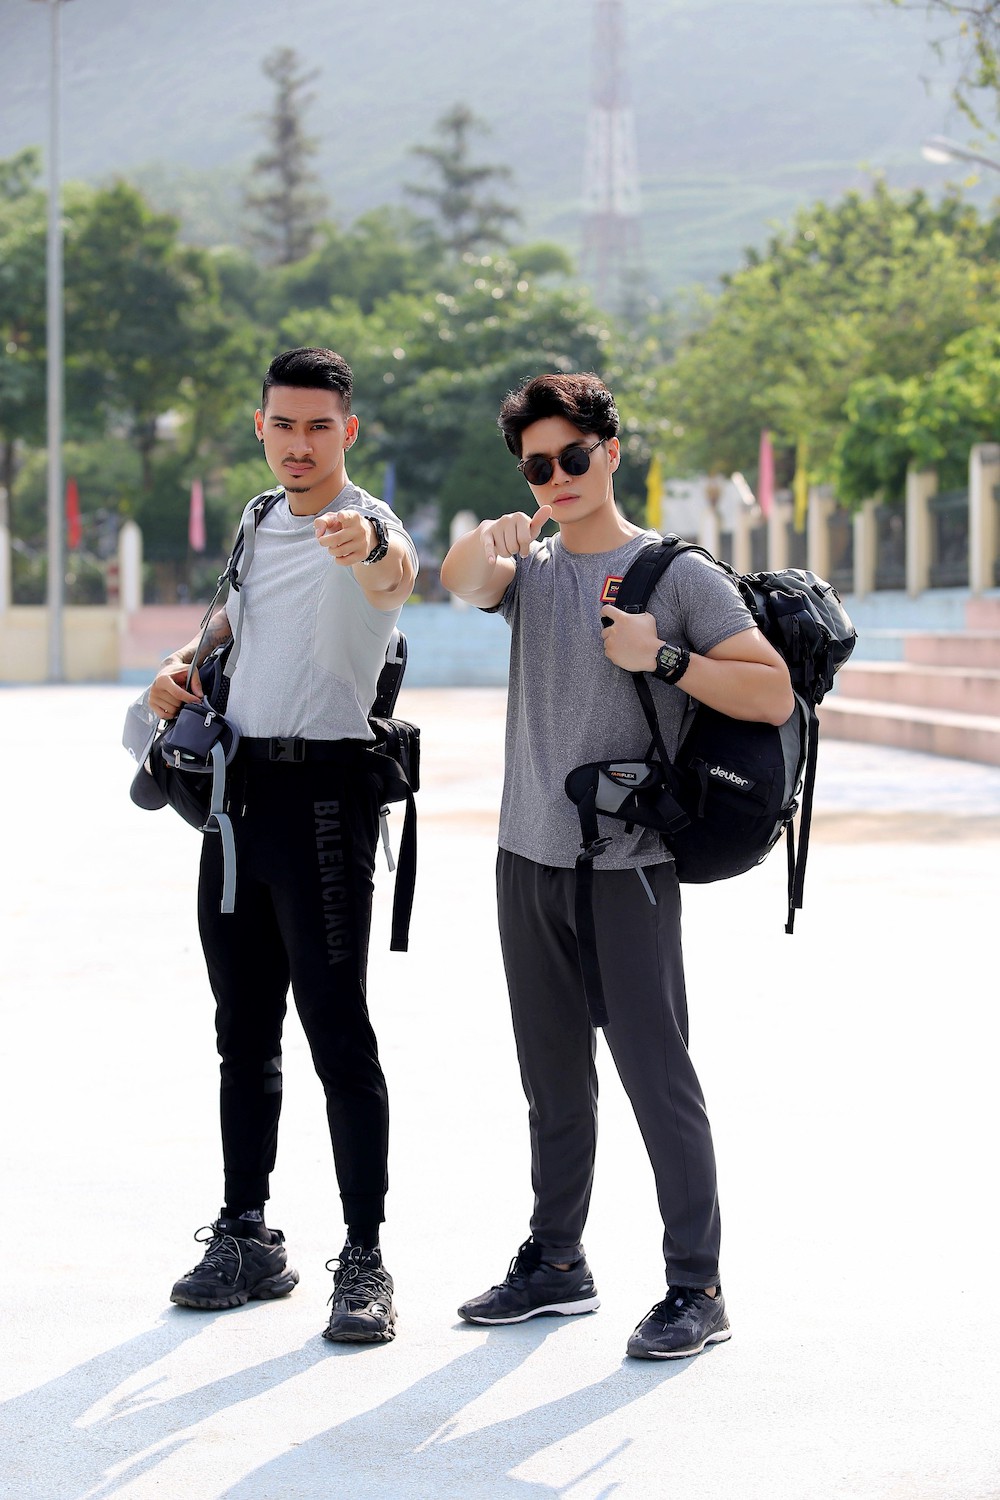 Which Vbiz star will land at Ngo Thanh Van's wedding: The guests are all A-star stars, if this is the groomsmen, the sauce will run out - Photo 10.